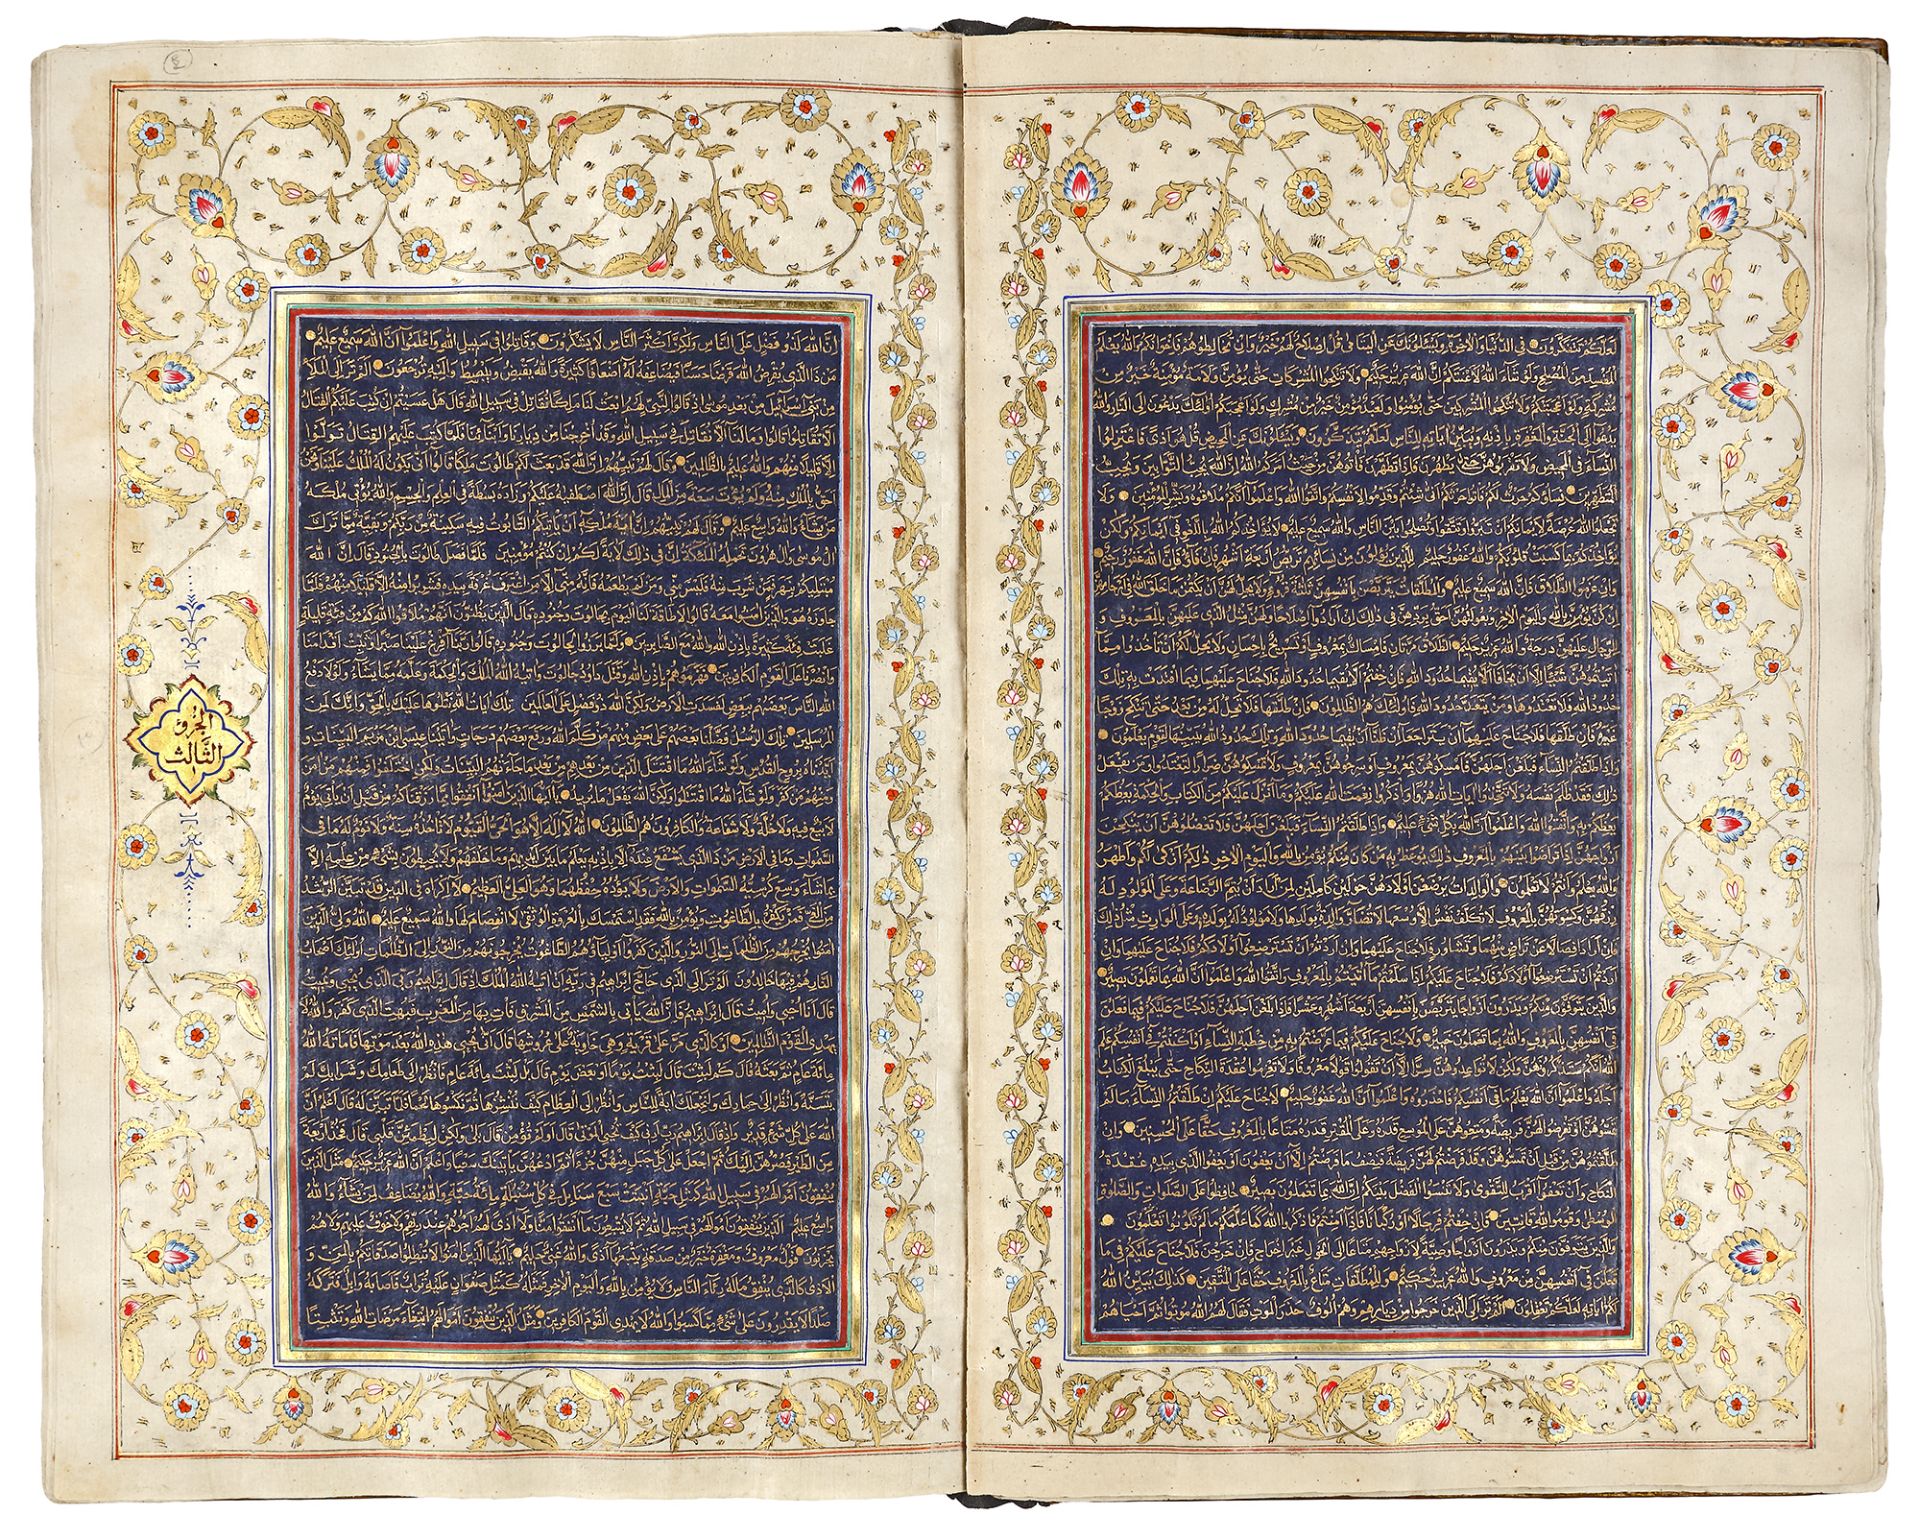 AN ILLUMINATED QURAN, PERSIA, LATE 19TH-EARLY 20TH CENTURY - Image 18 of 27